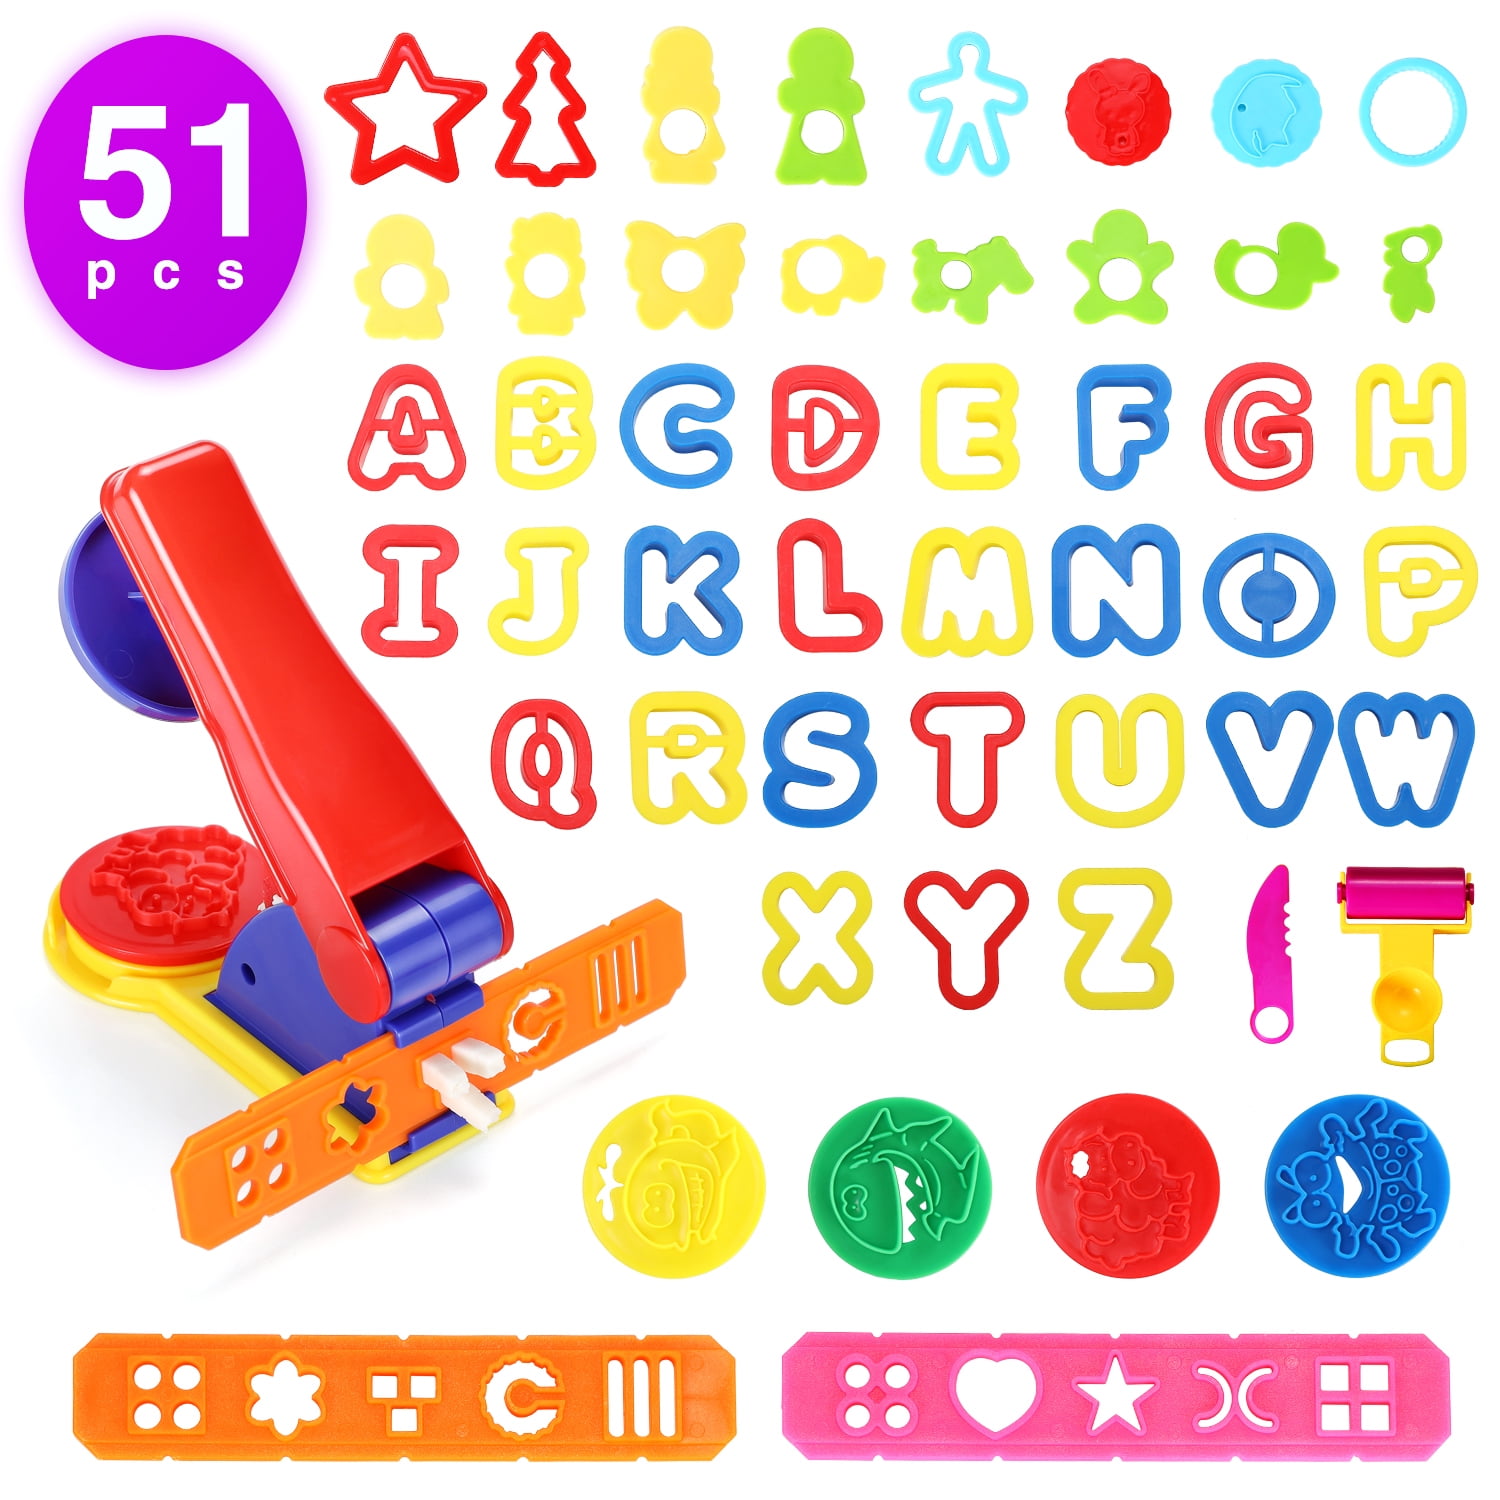 146 Piece Play-Doh School Tools Set Letters Numbers Animals Cutters Molds